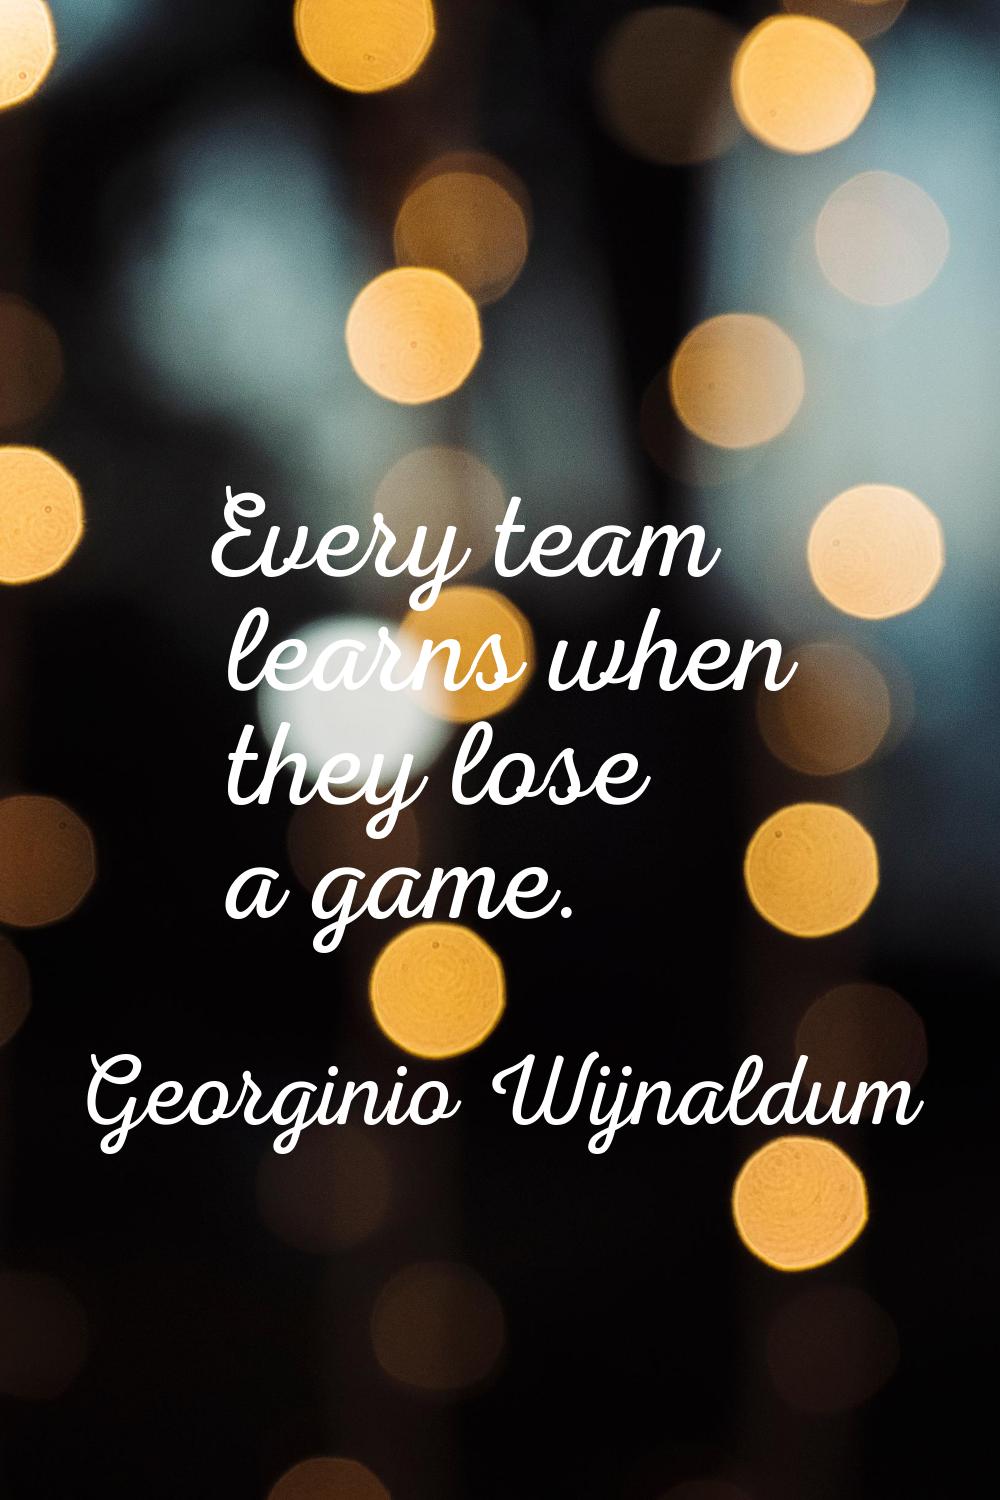 Every team learns when they lose a game.